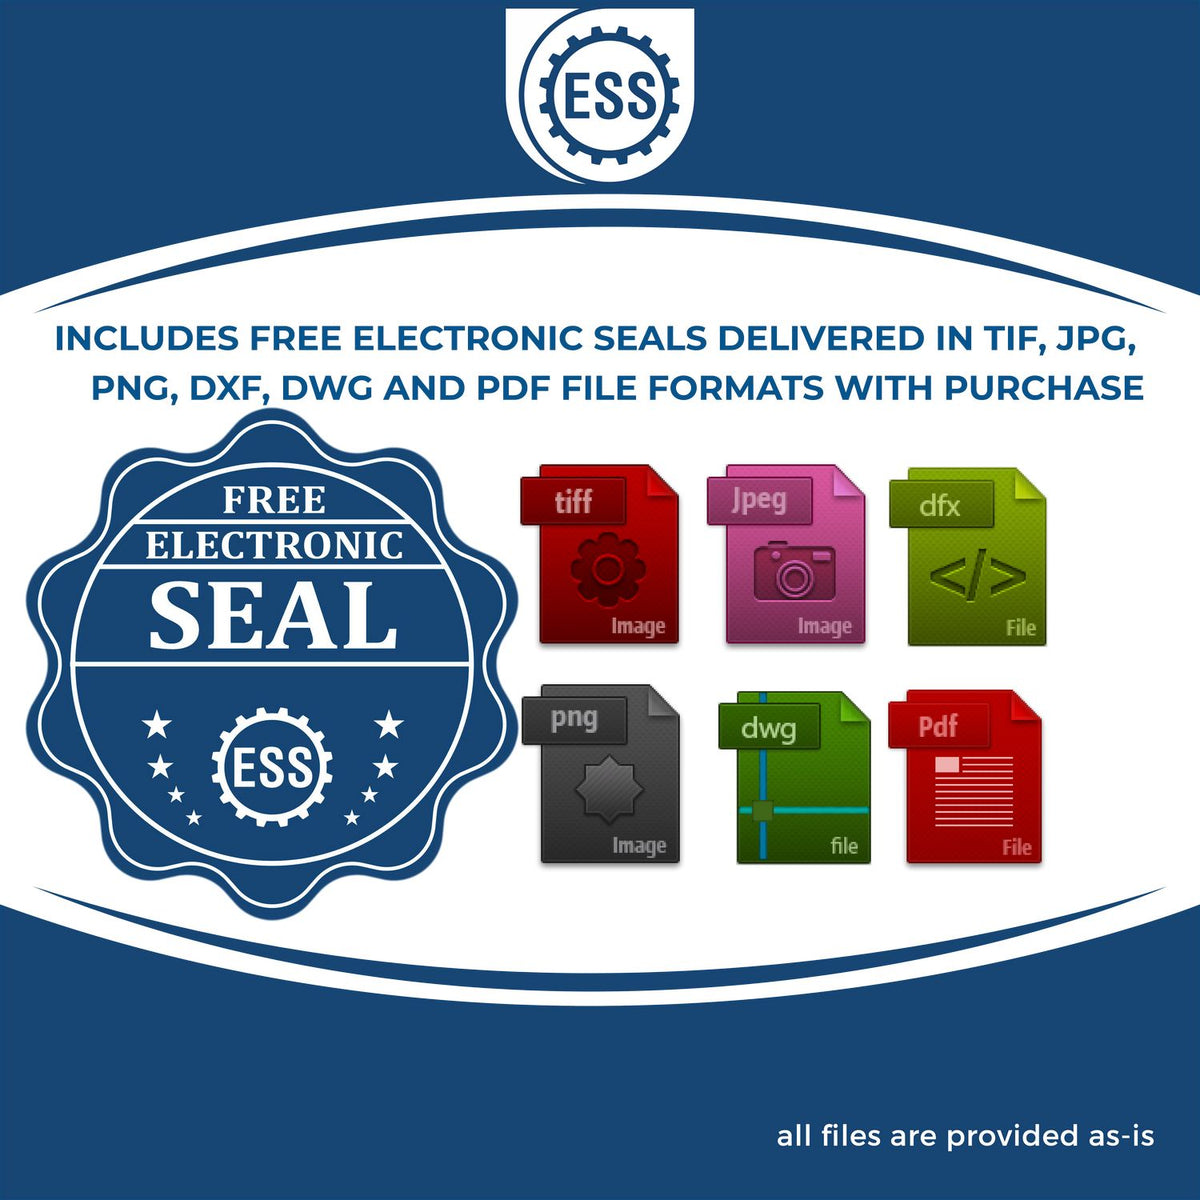 An infographic for the free electronic seal for the Hybrid Tennessee Geologist Seal illustrating the different file type icons such as DXF, DWG, TIF, JPG and PNG.